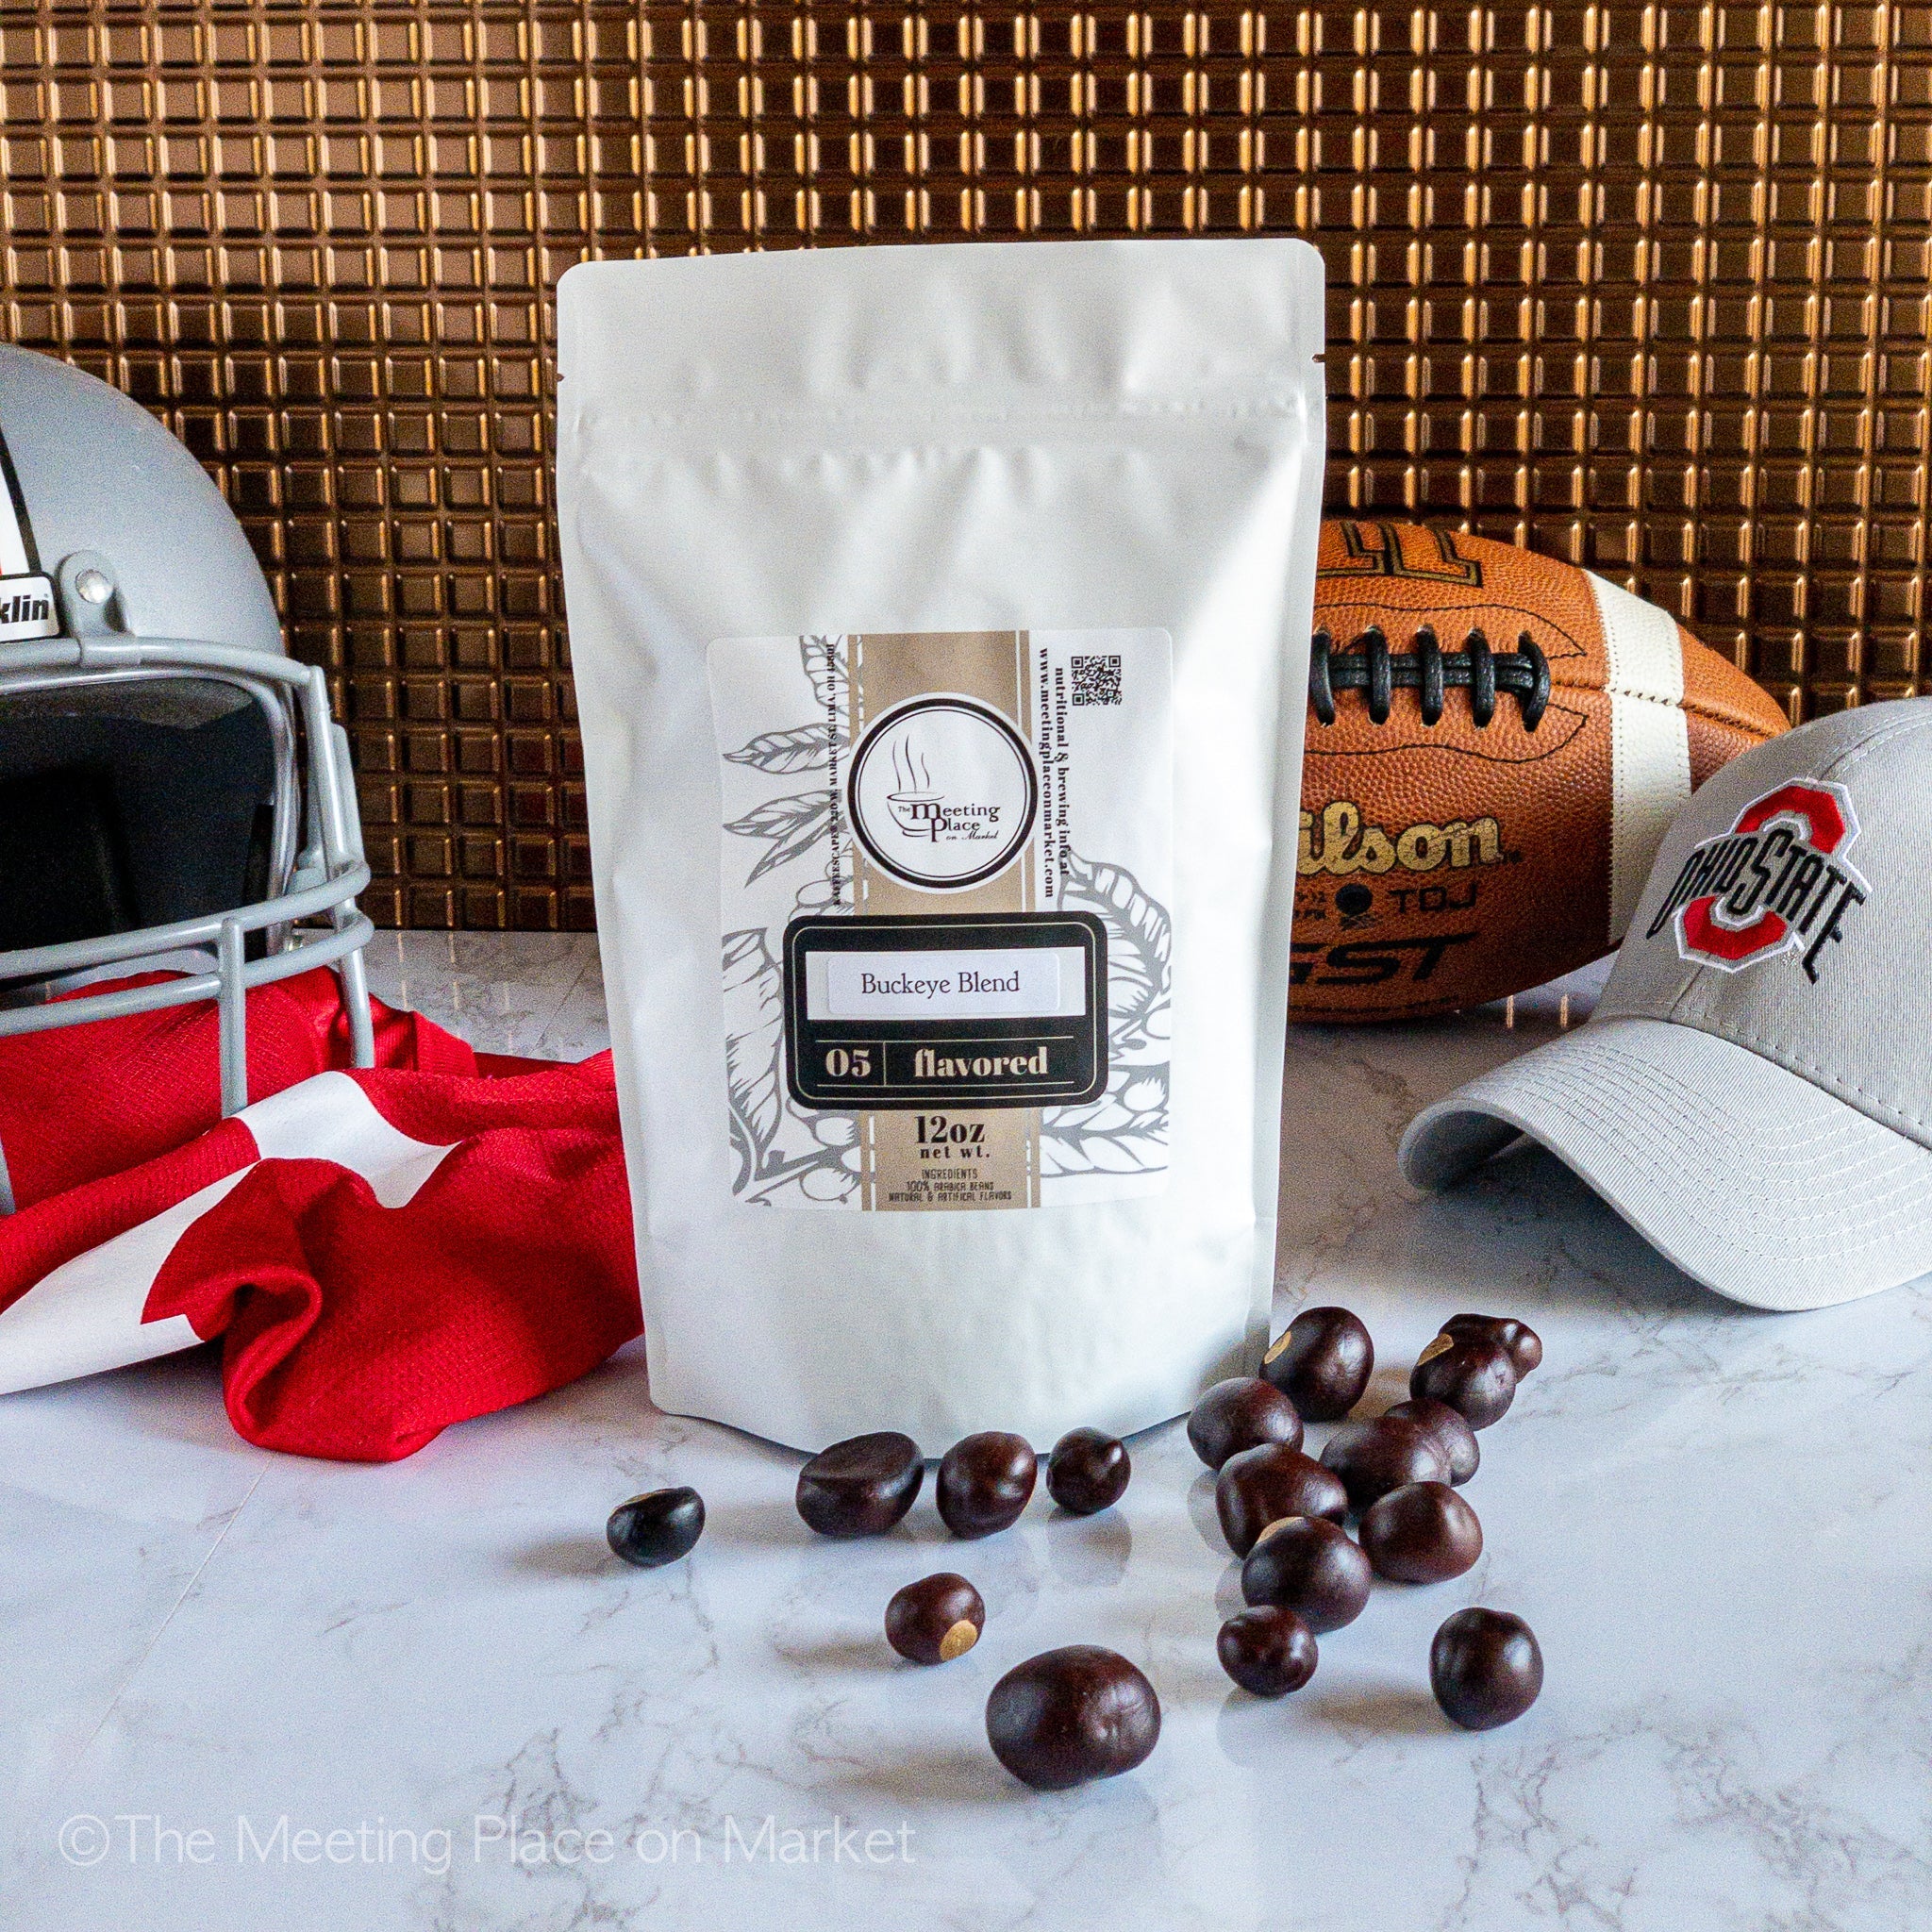 Buckeye Blend | Chocolate & Peanut Butter Flavored Coffee Beans / Ground Coffee Gourmet Coffee - The Meeting Place on Market